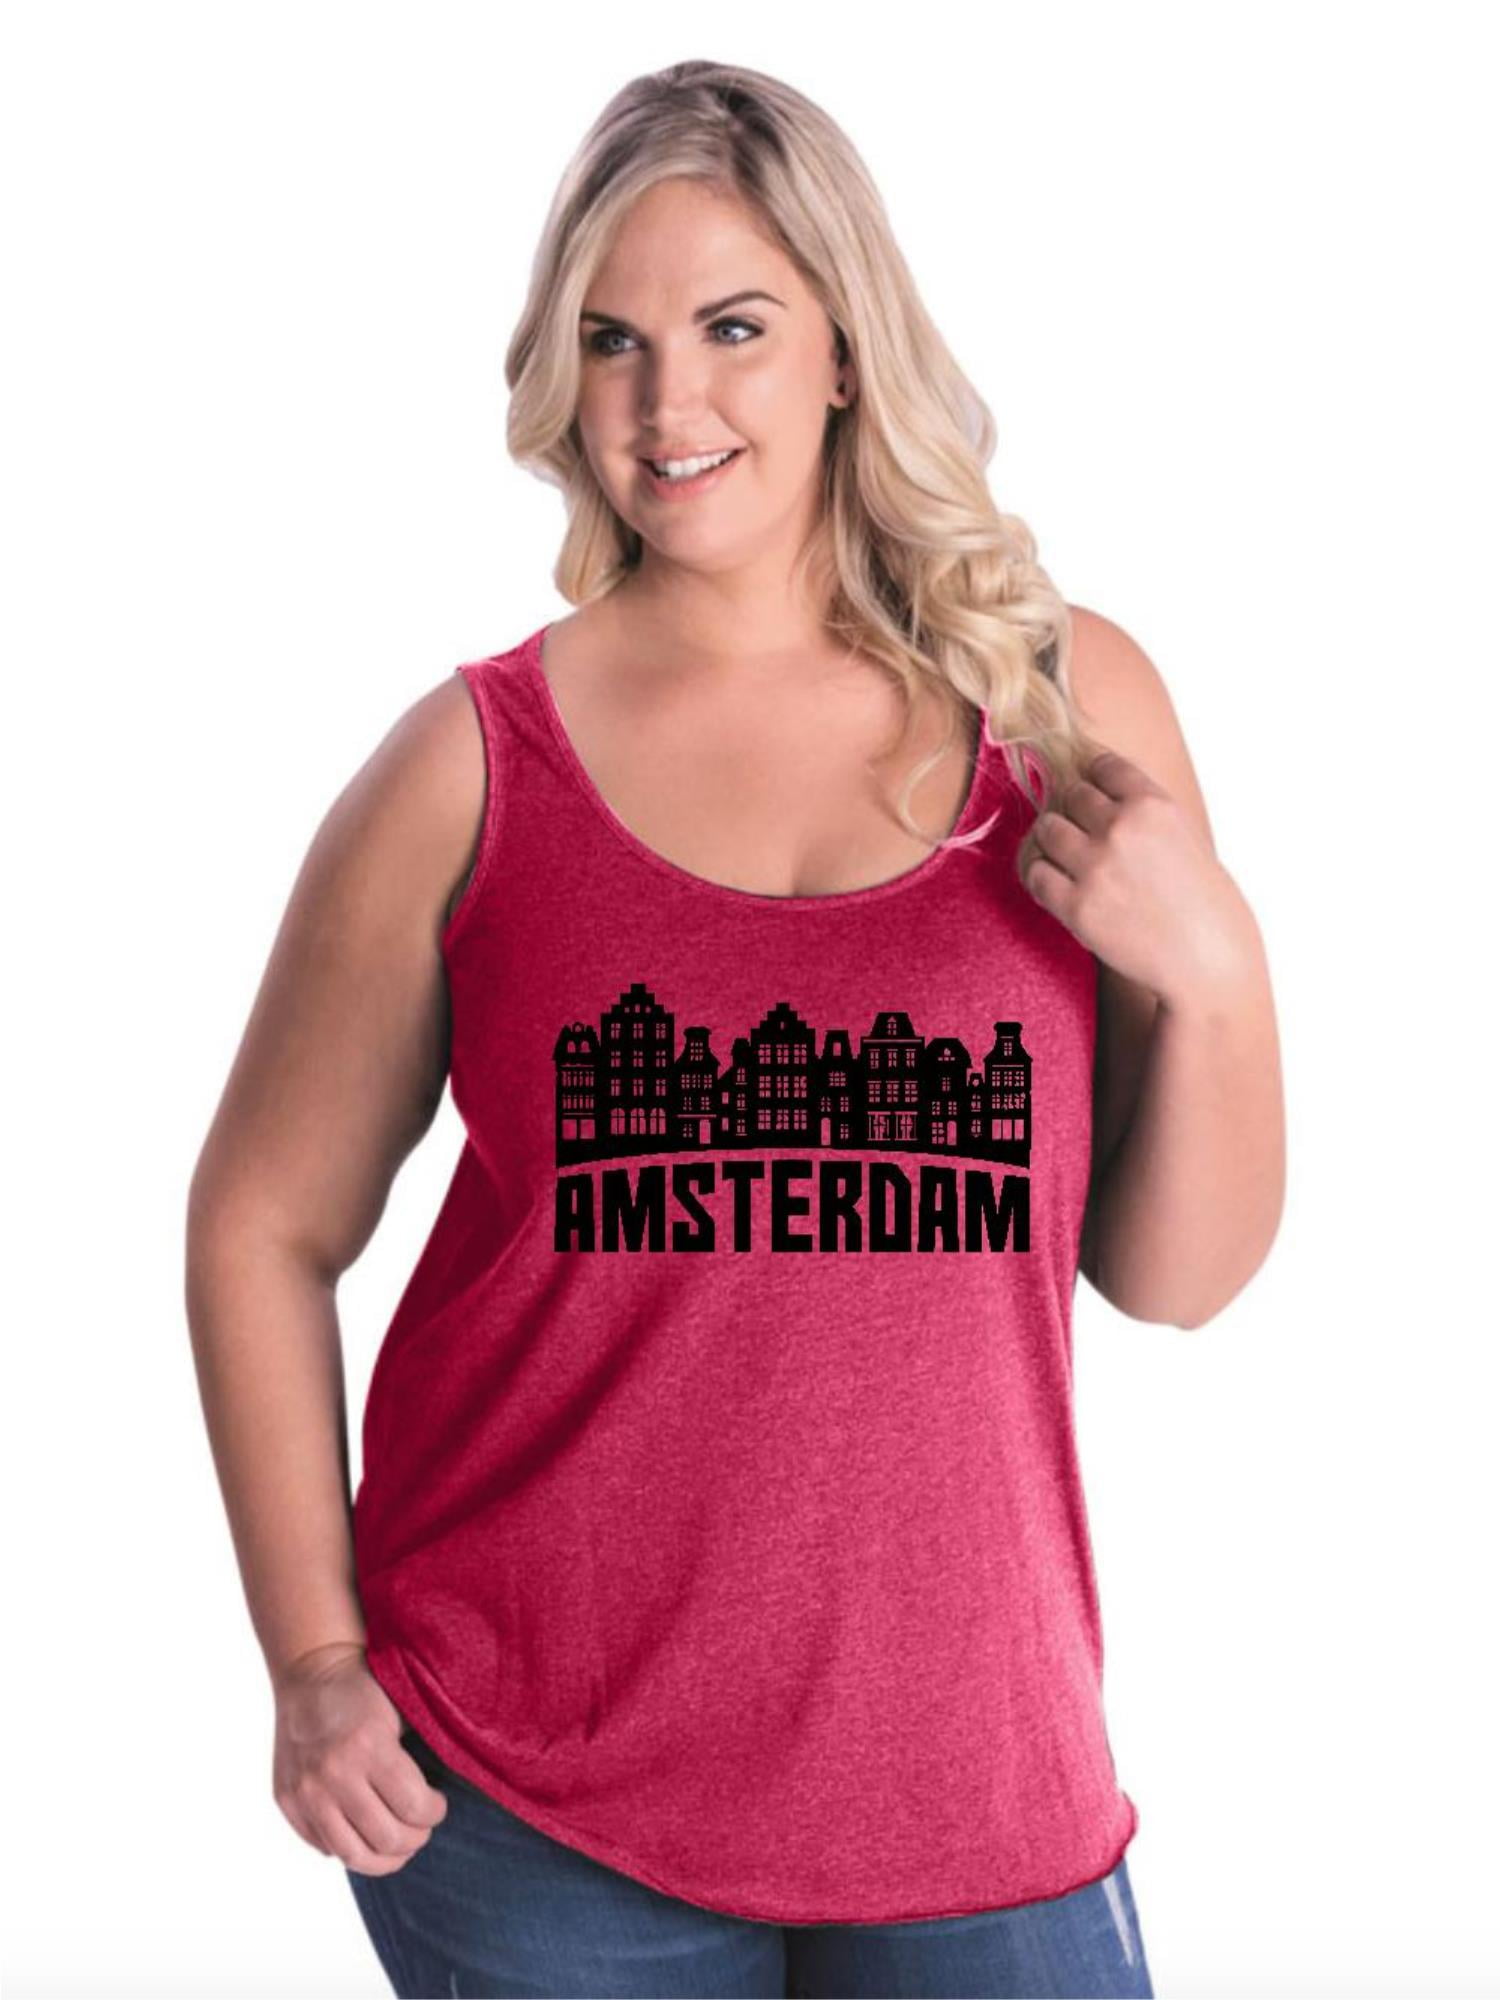 Normal is Boring Women's Plus Top, up to Size 28 - Amsterdam - Walmart.com